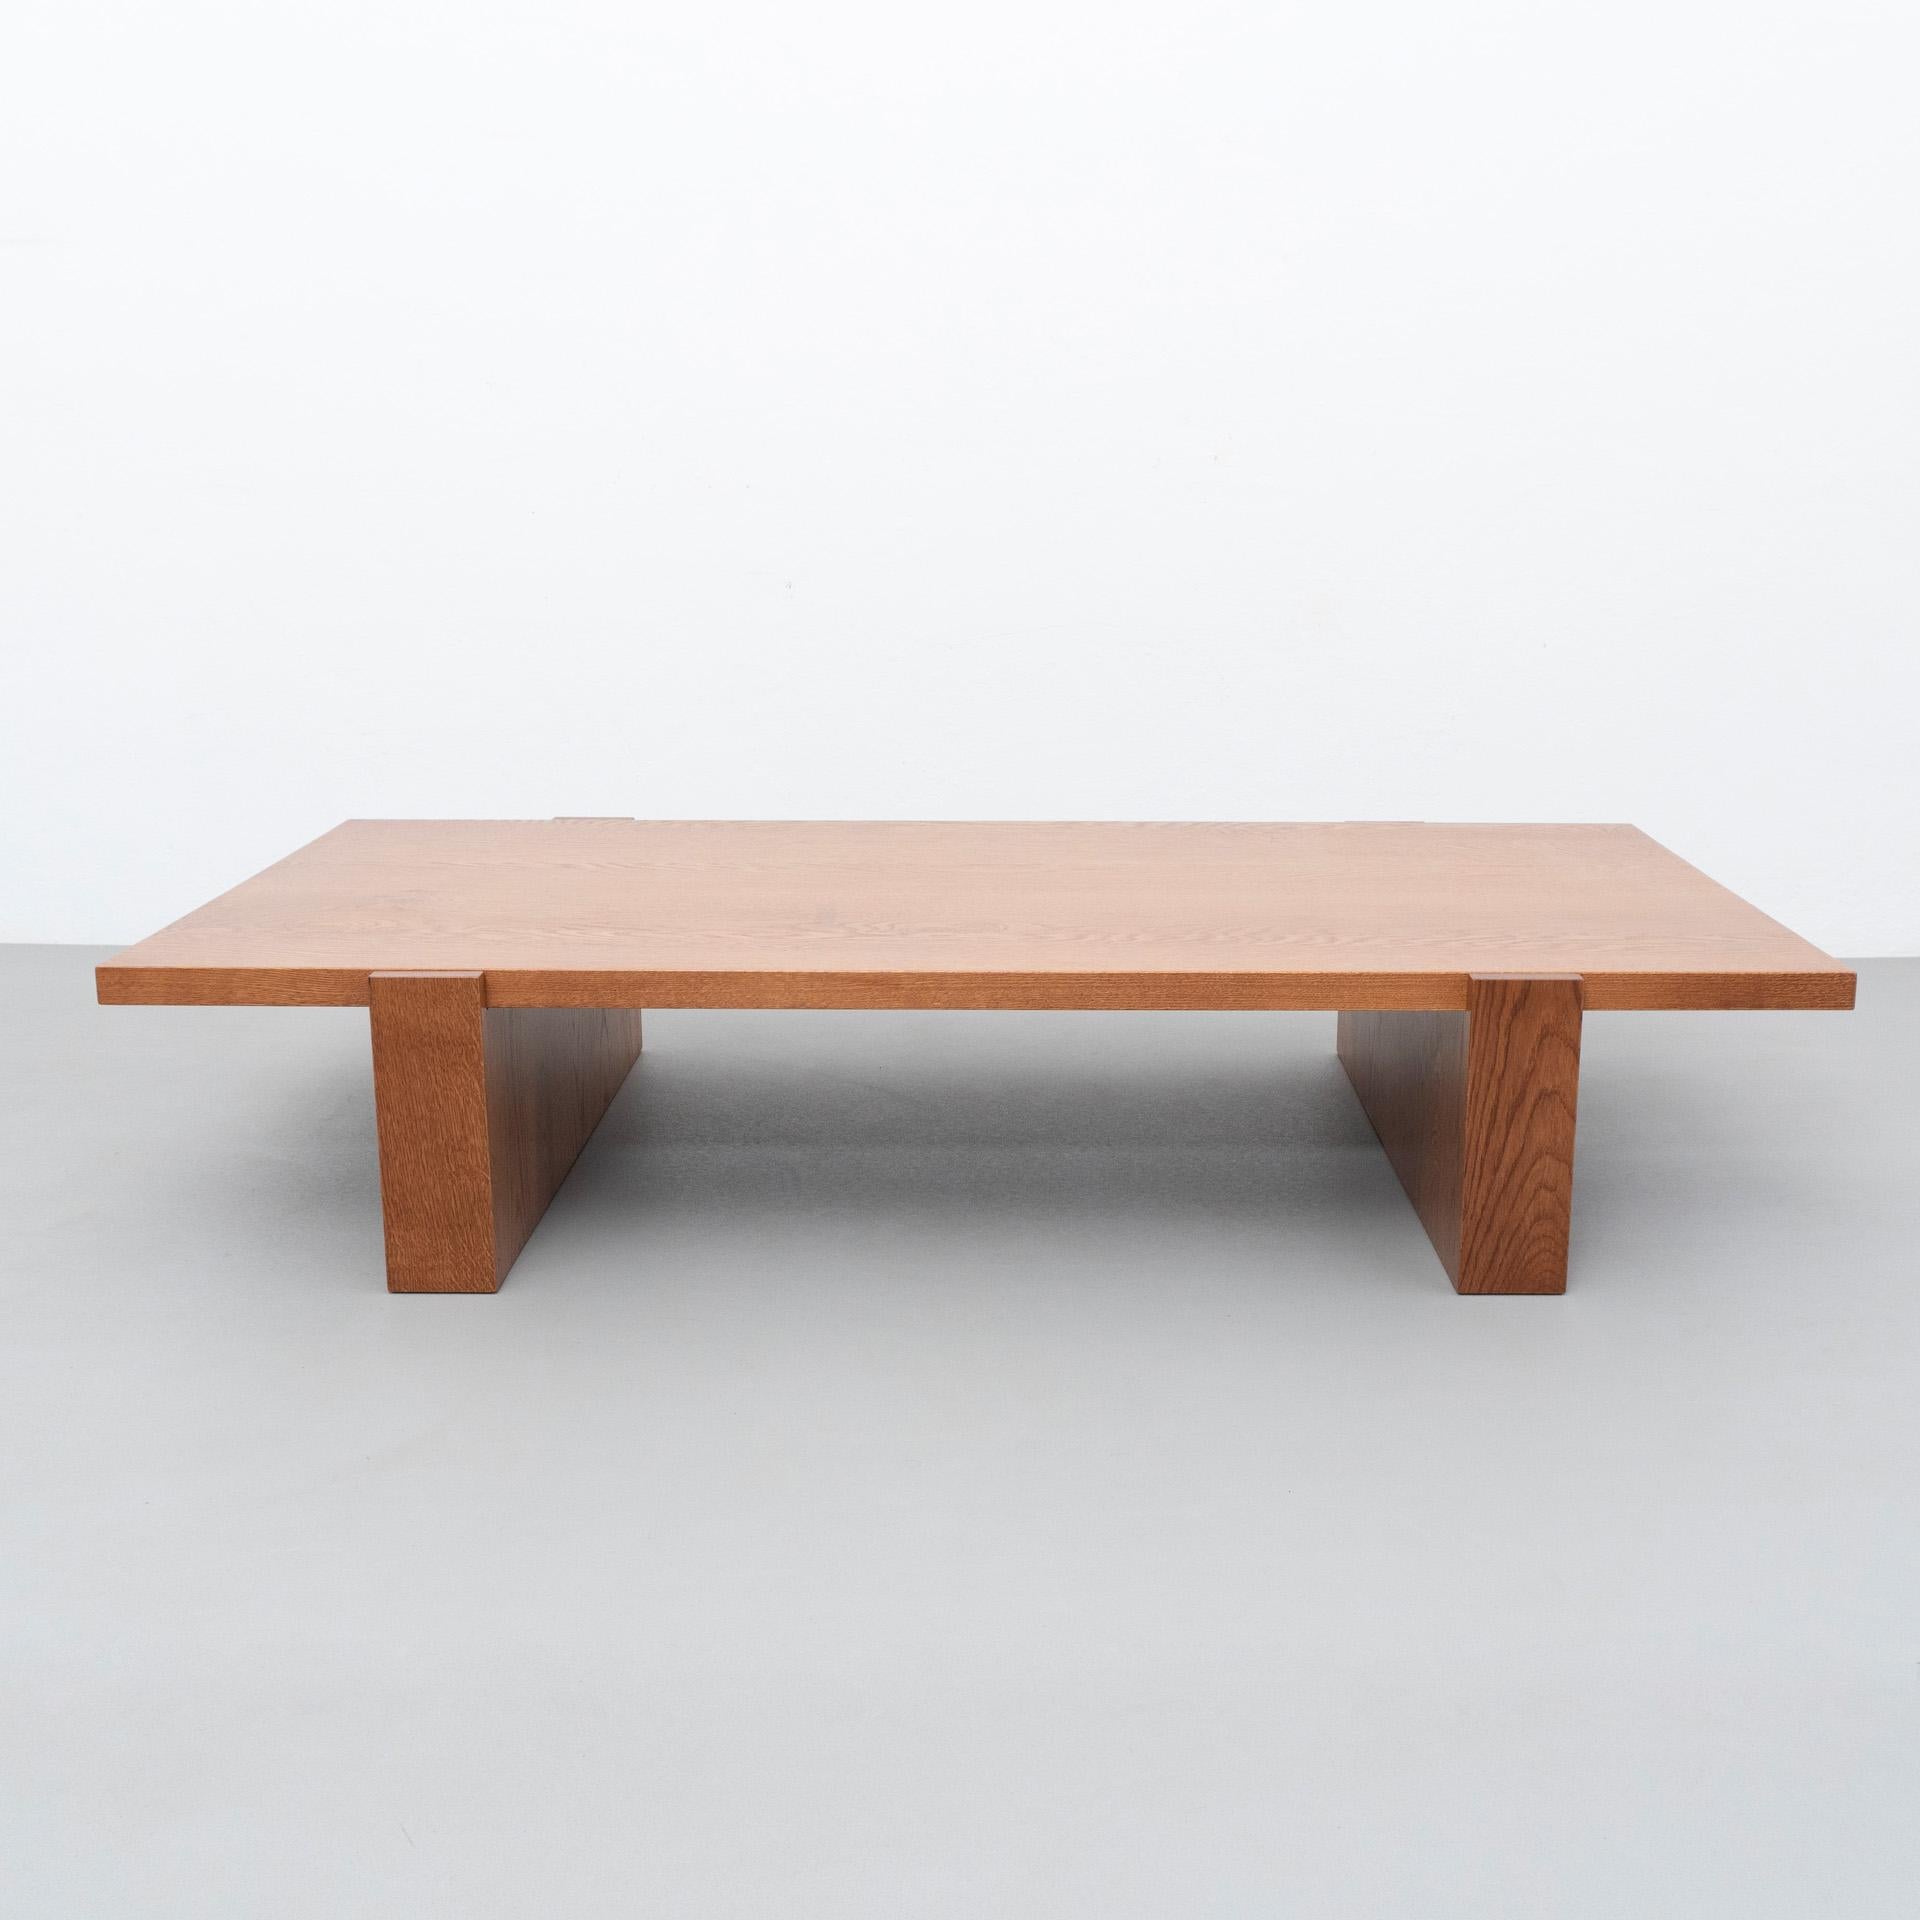 Dada Est. Contemporary Solid Oak Low Table  For Sale 6